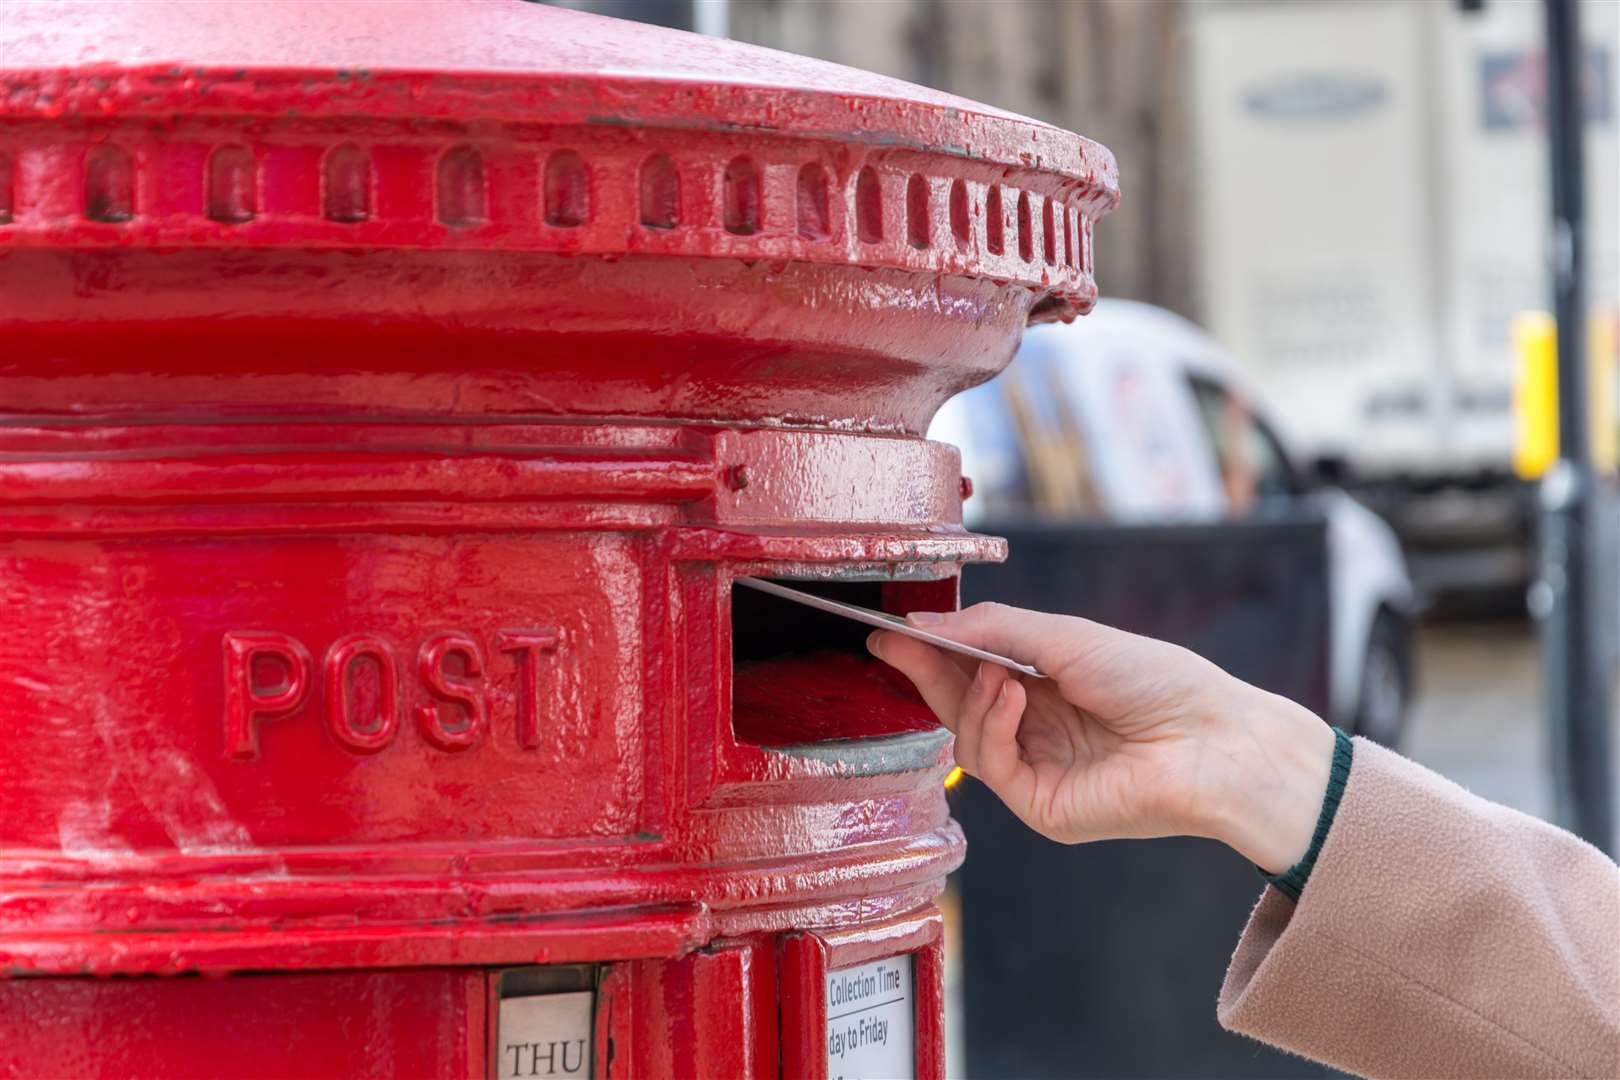 Many residents in the Newbury and Thatcham areas have not received any mail over the Christmas period.